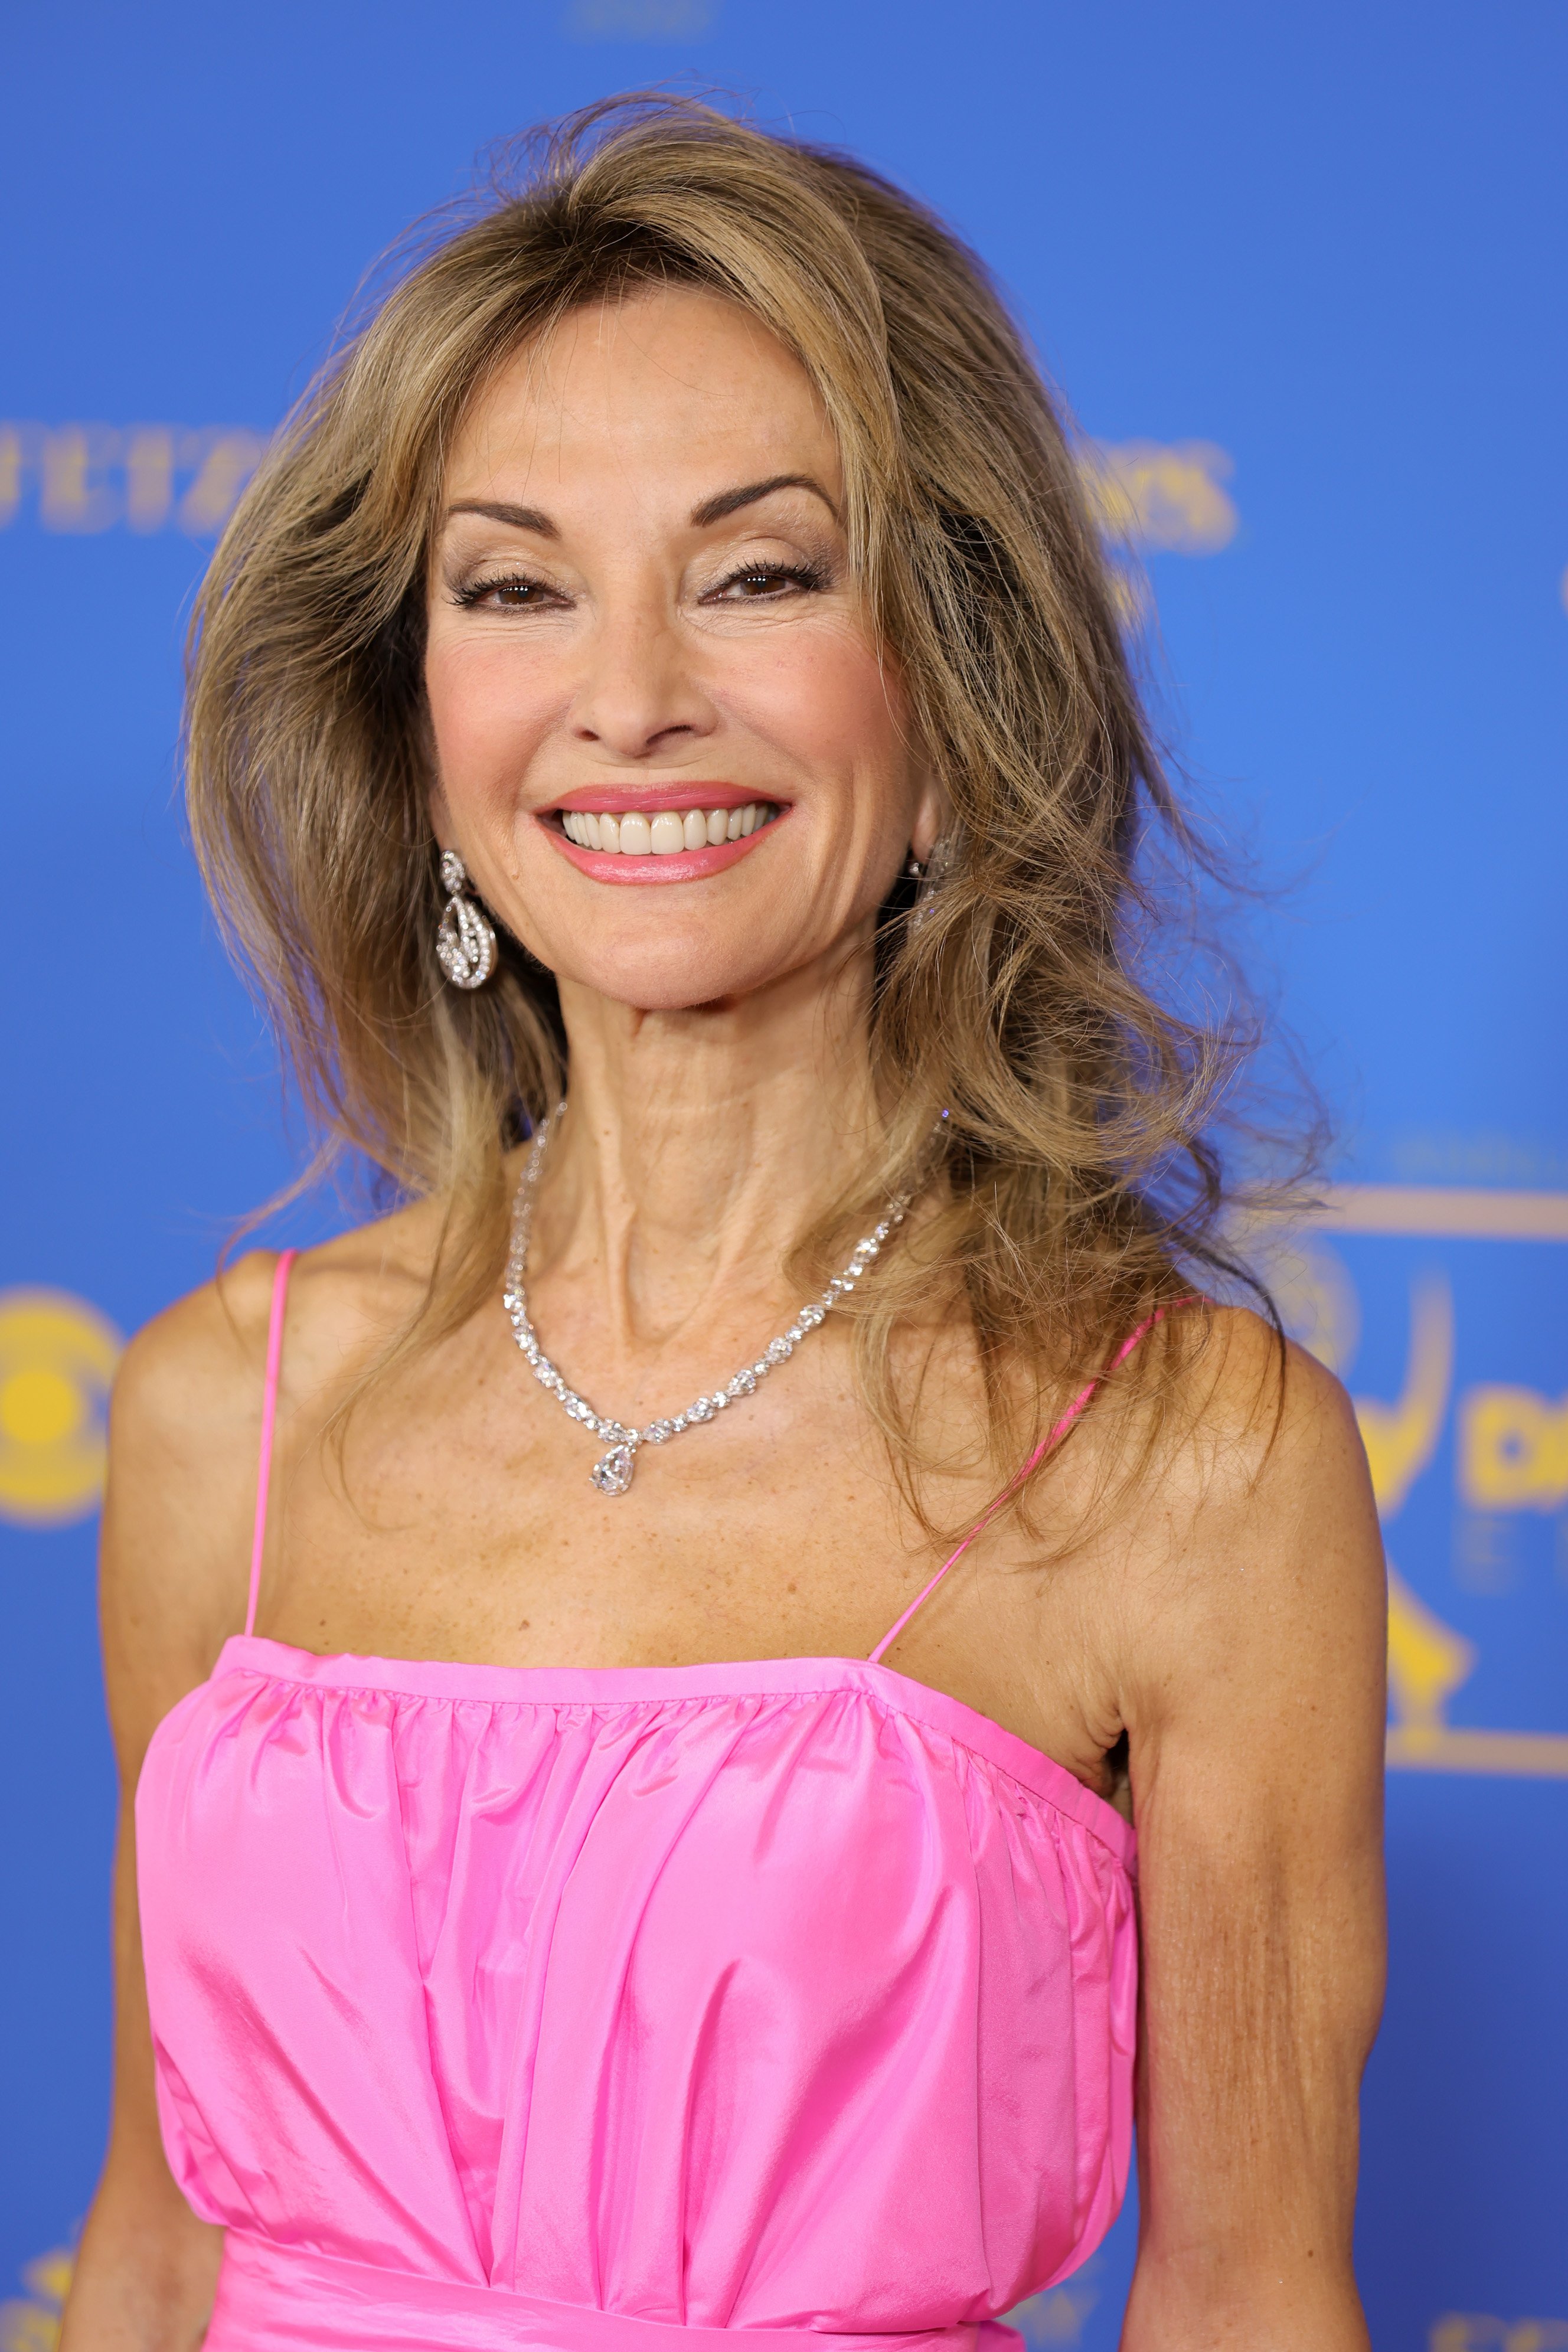 Susan Lucci attends the 49th Daytime Emmy Awards at Pasadena Convention Center on June 24, 2022 in Pasadena, California. | Source: Getty Images